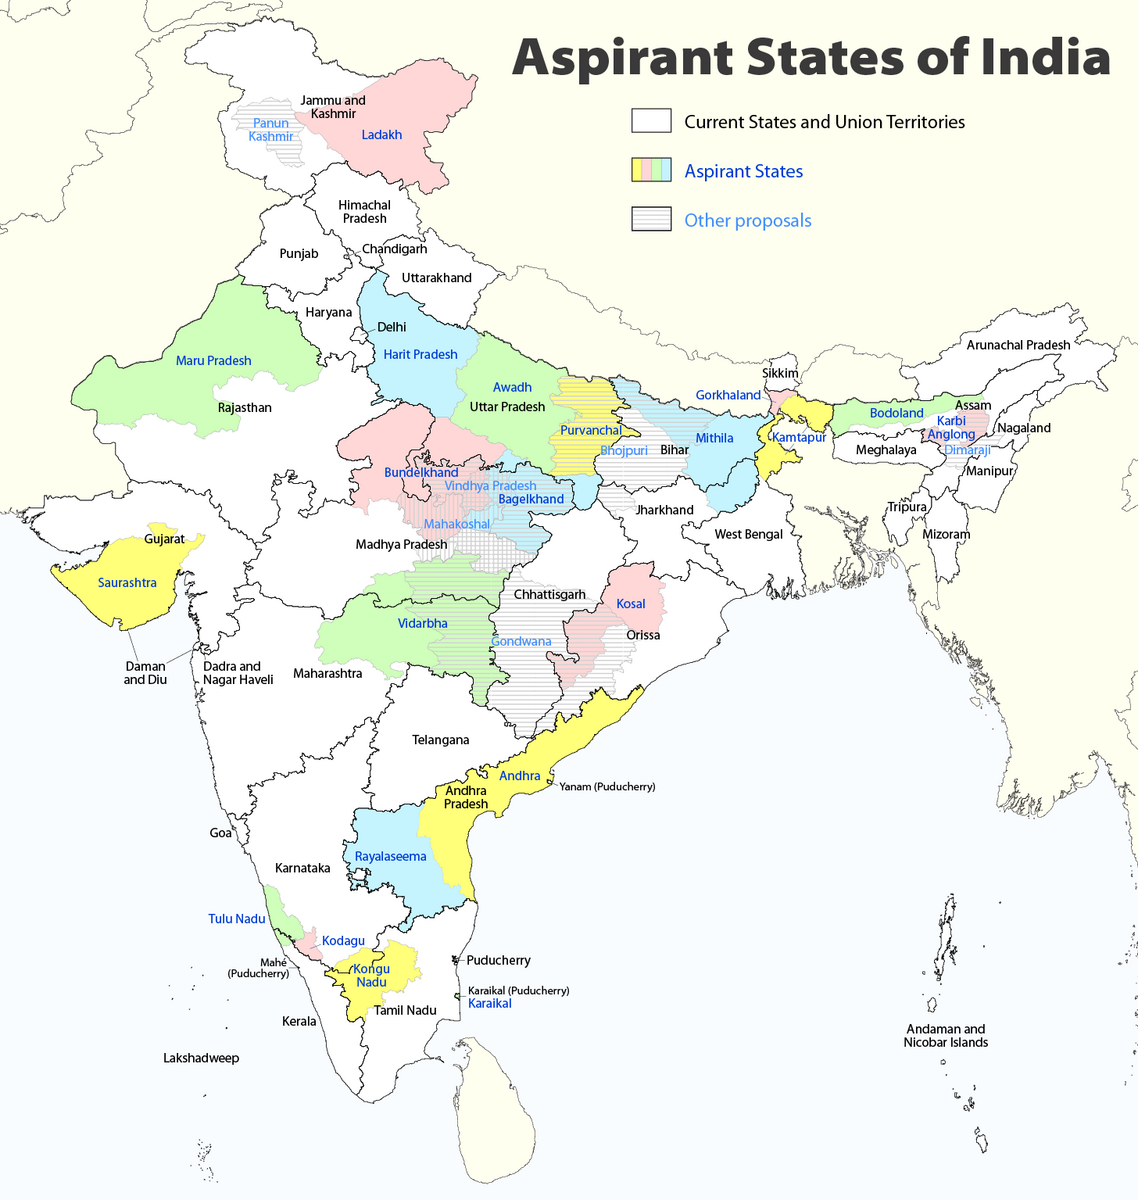 Proposed states and territories of India